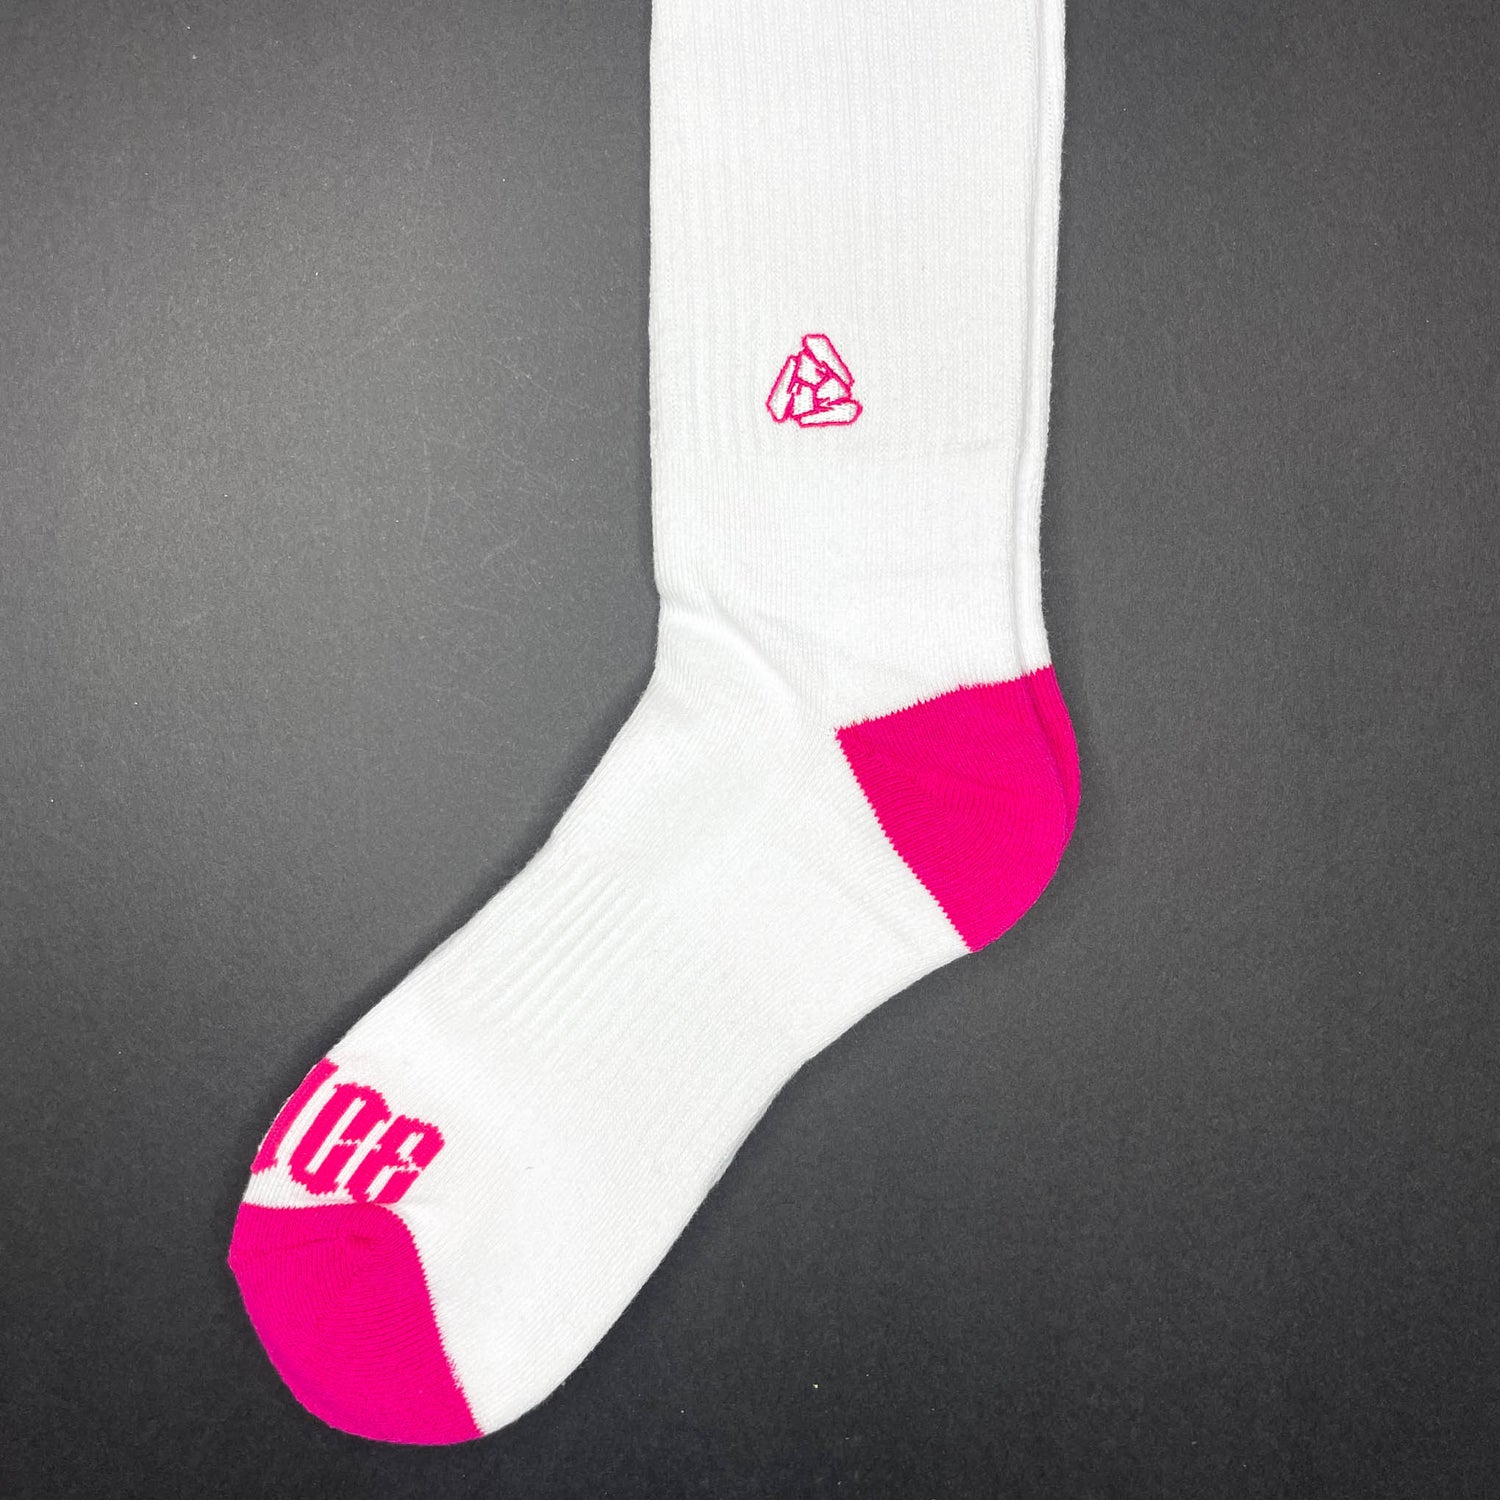 Side view of Menace Clothing Hood Rat pink and white knee high socks with Menace on toes and Tri M logo on side.